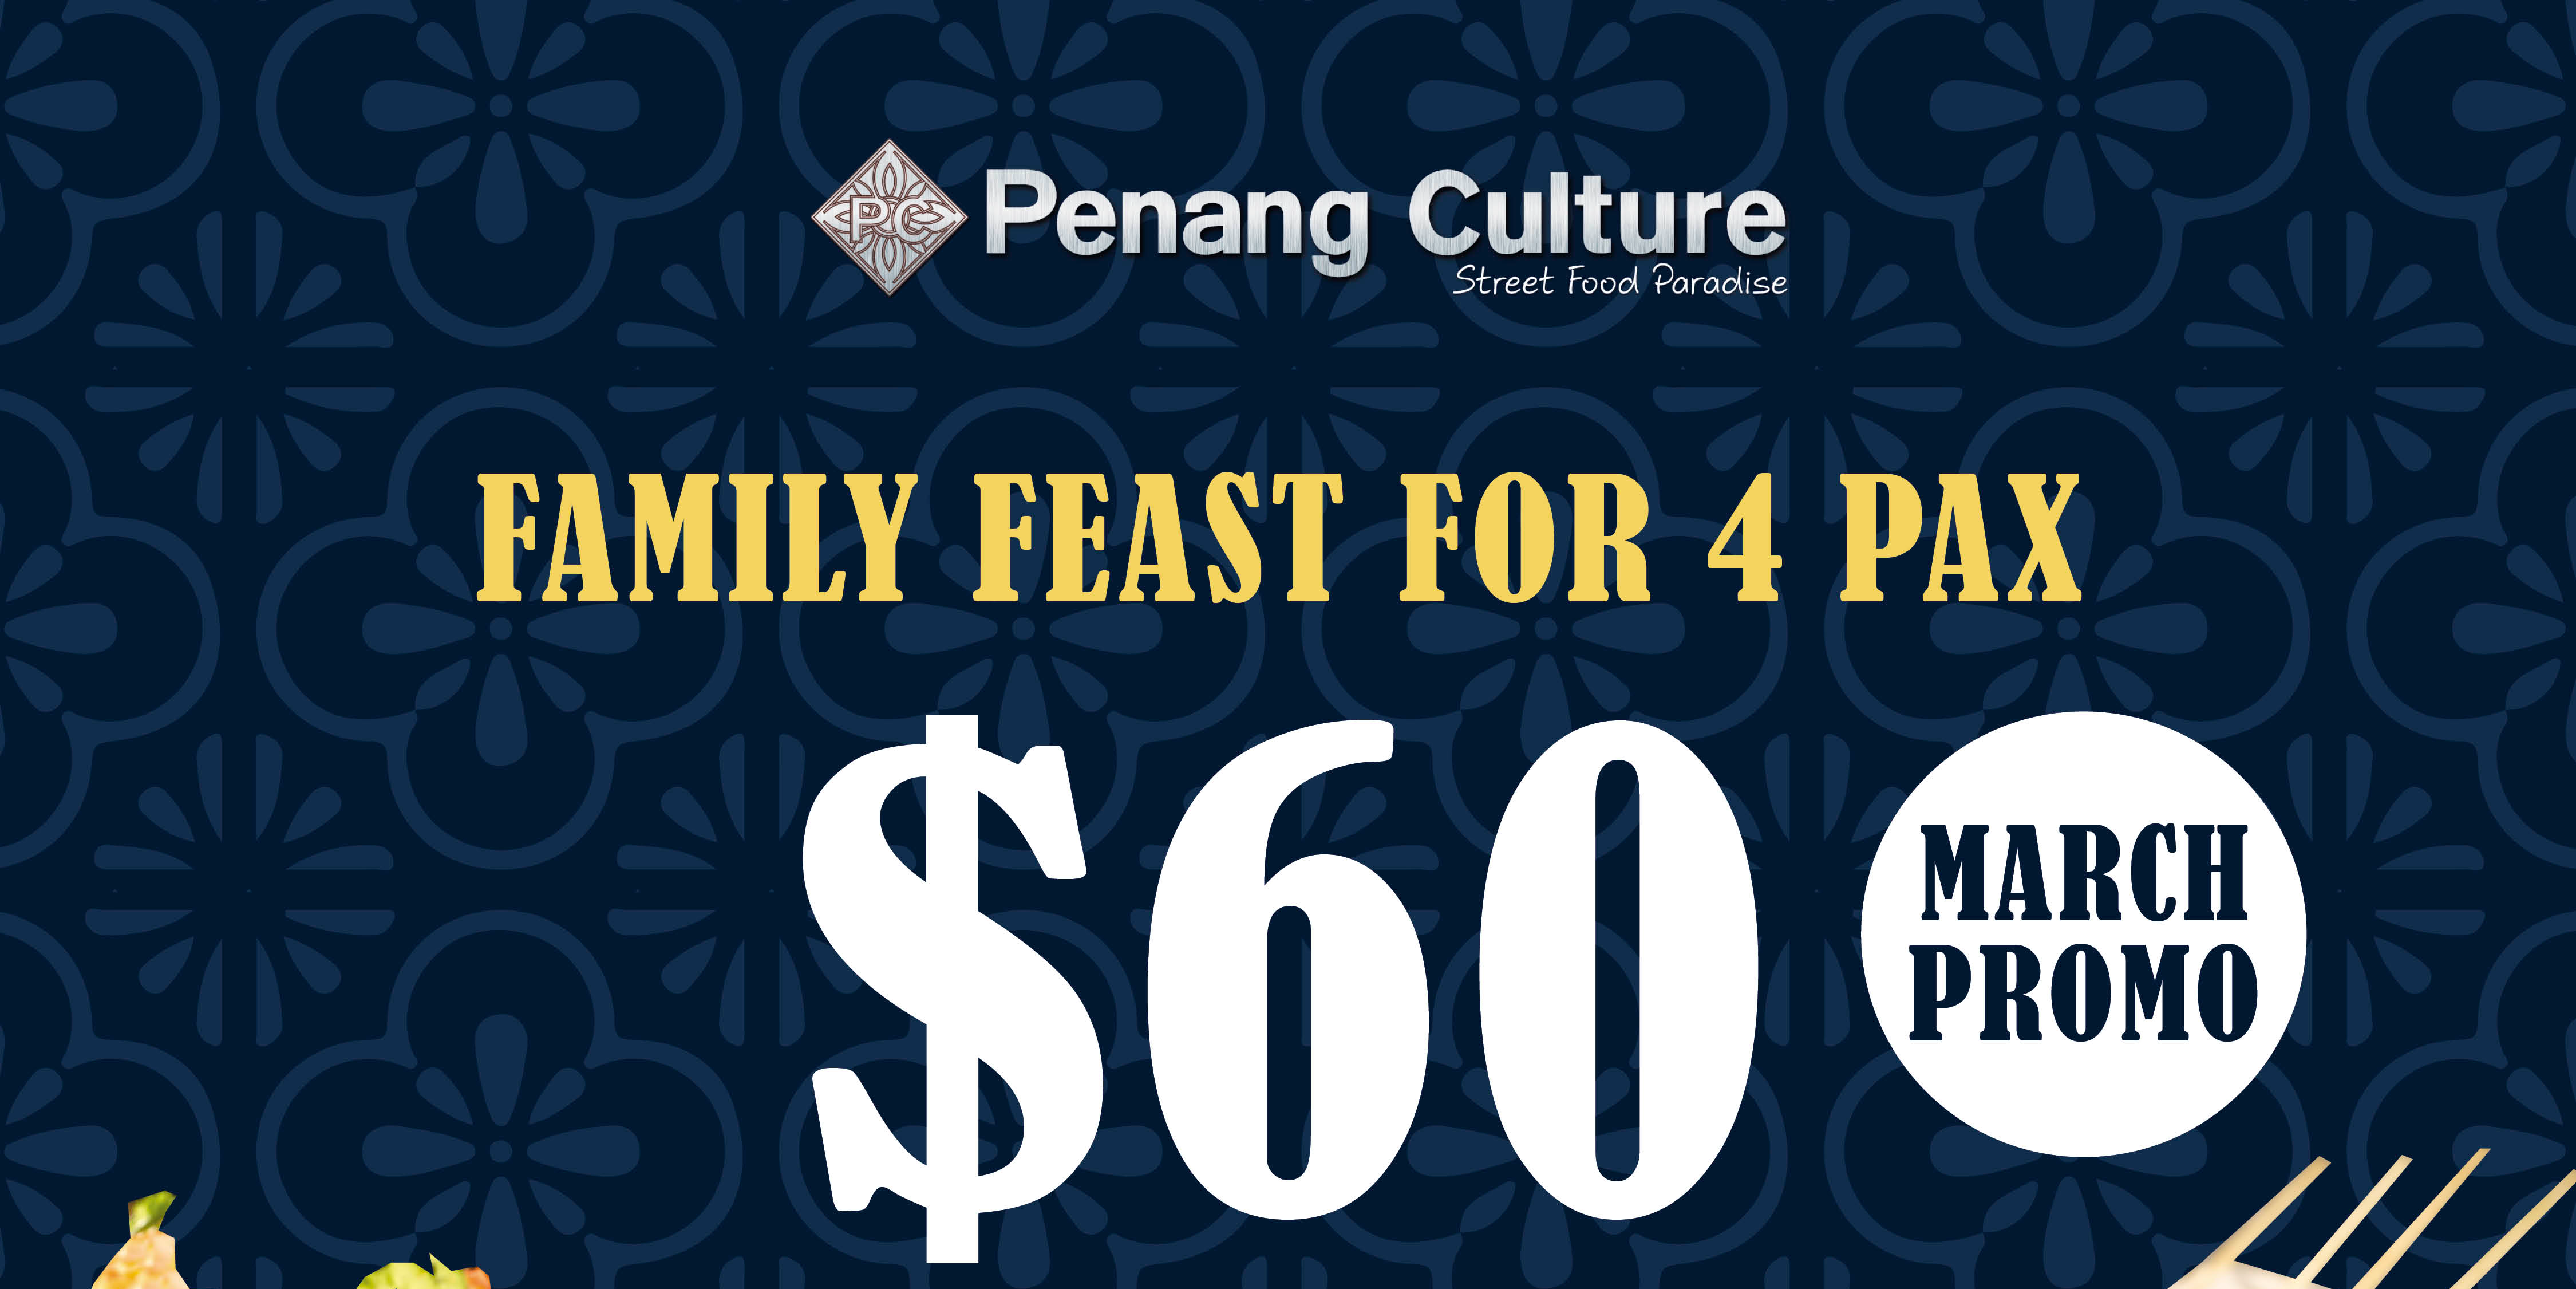 Penang Culture Launches Family Feast Bundle for 4 This March School Holidays!